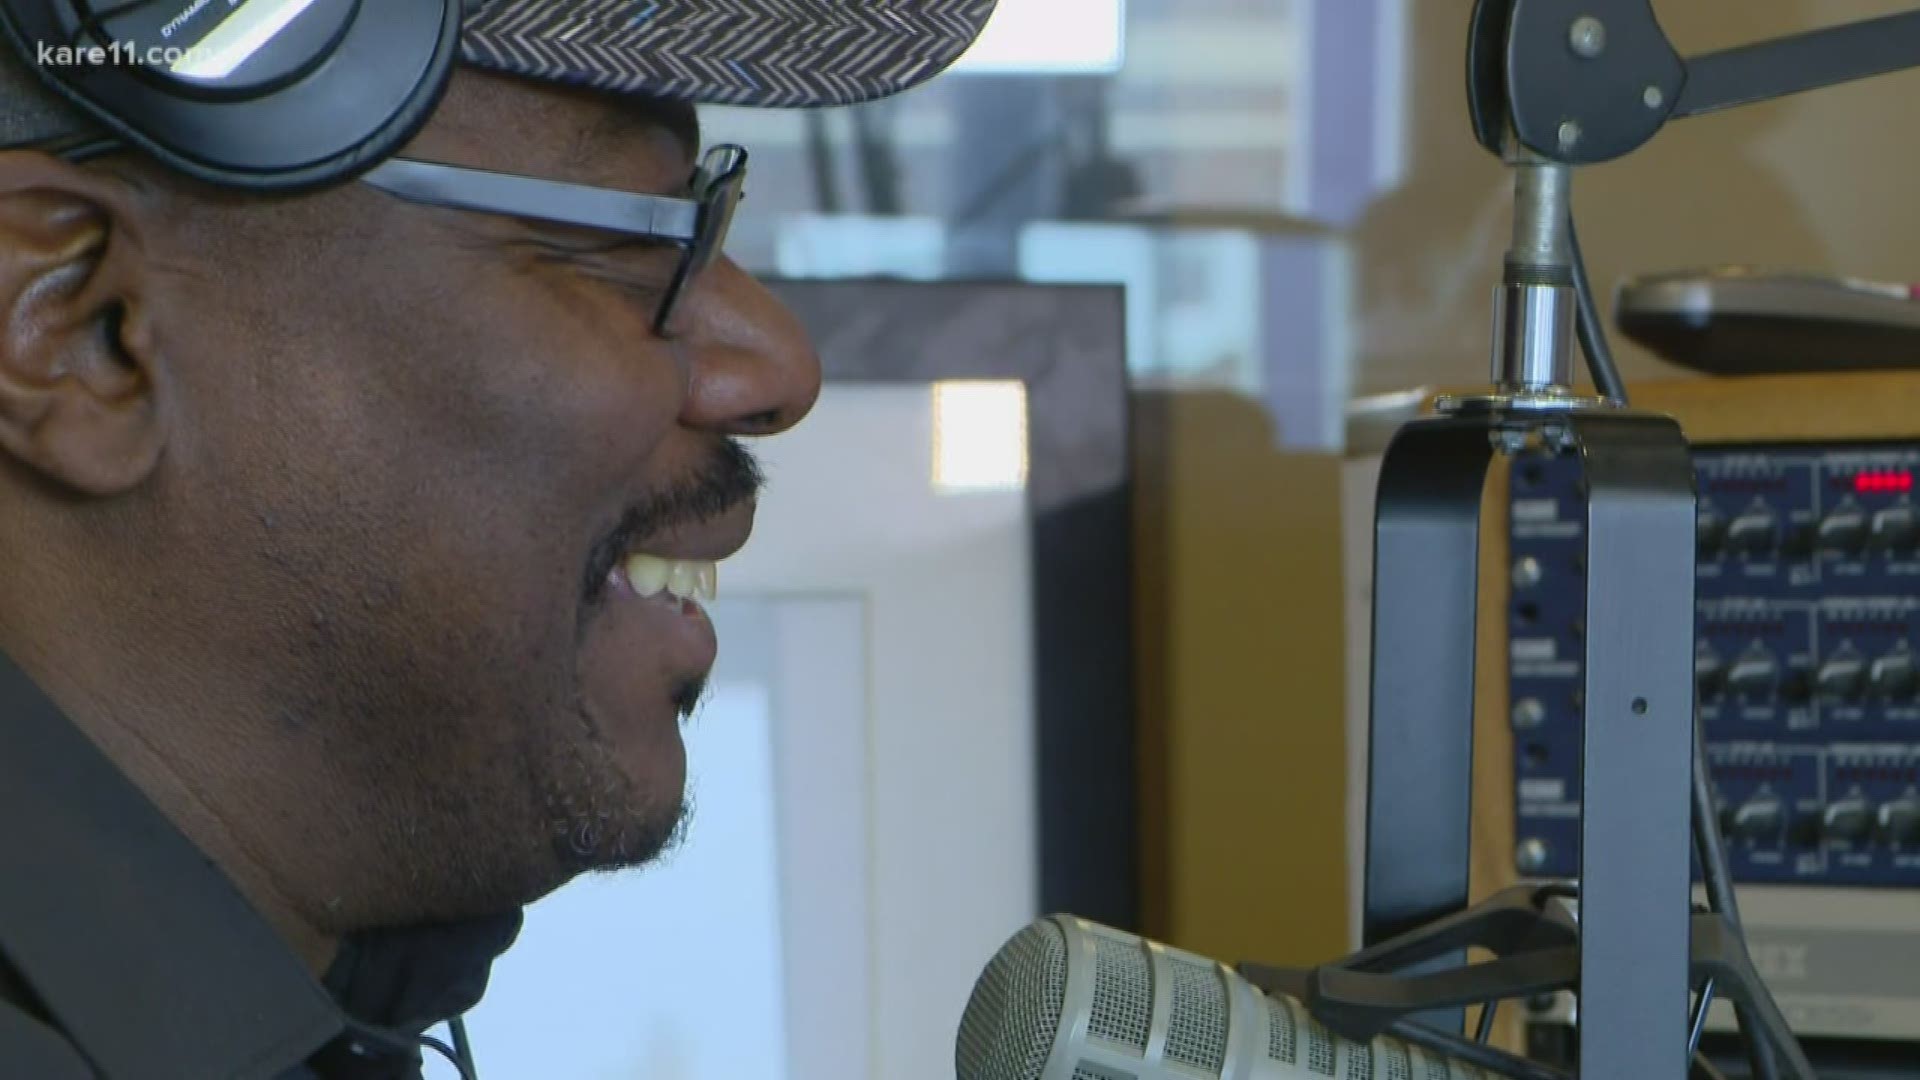 The city of Minneapolis highlighted a community leader making a difference with his microphone: Walter "Q Bear" Banks.